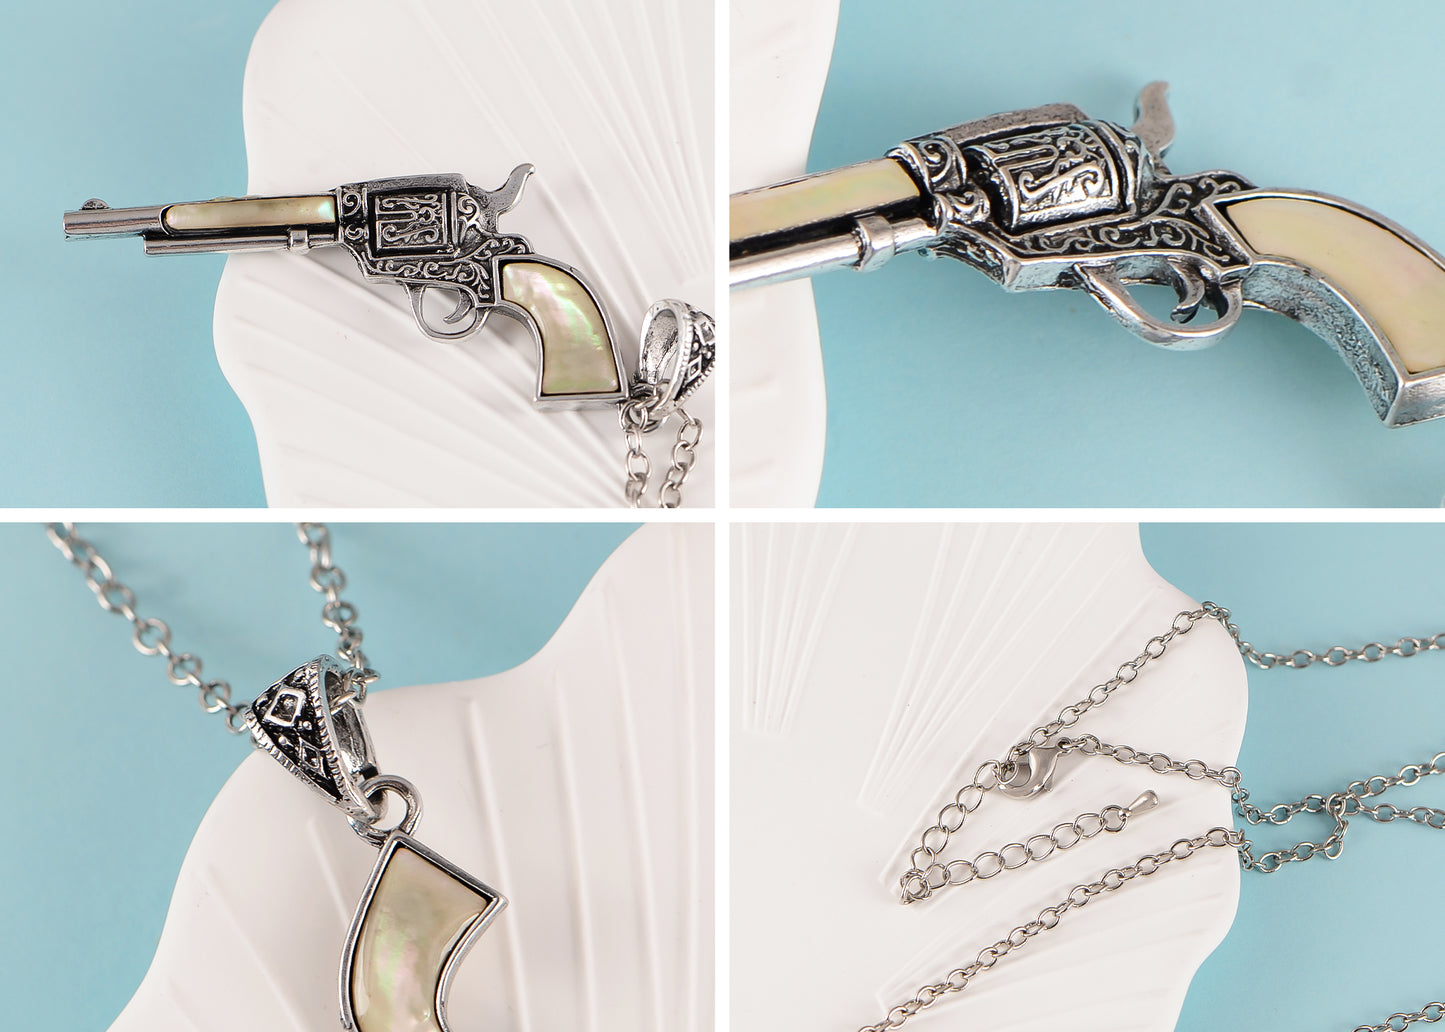 Alilang Antiqued Silvery Tone Abalone Shell Revolver Pistol Gun Pendant Necklace for Women Men